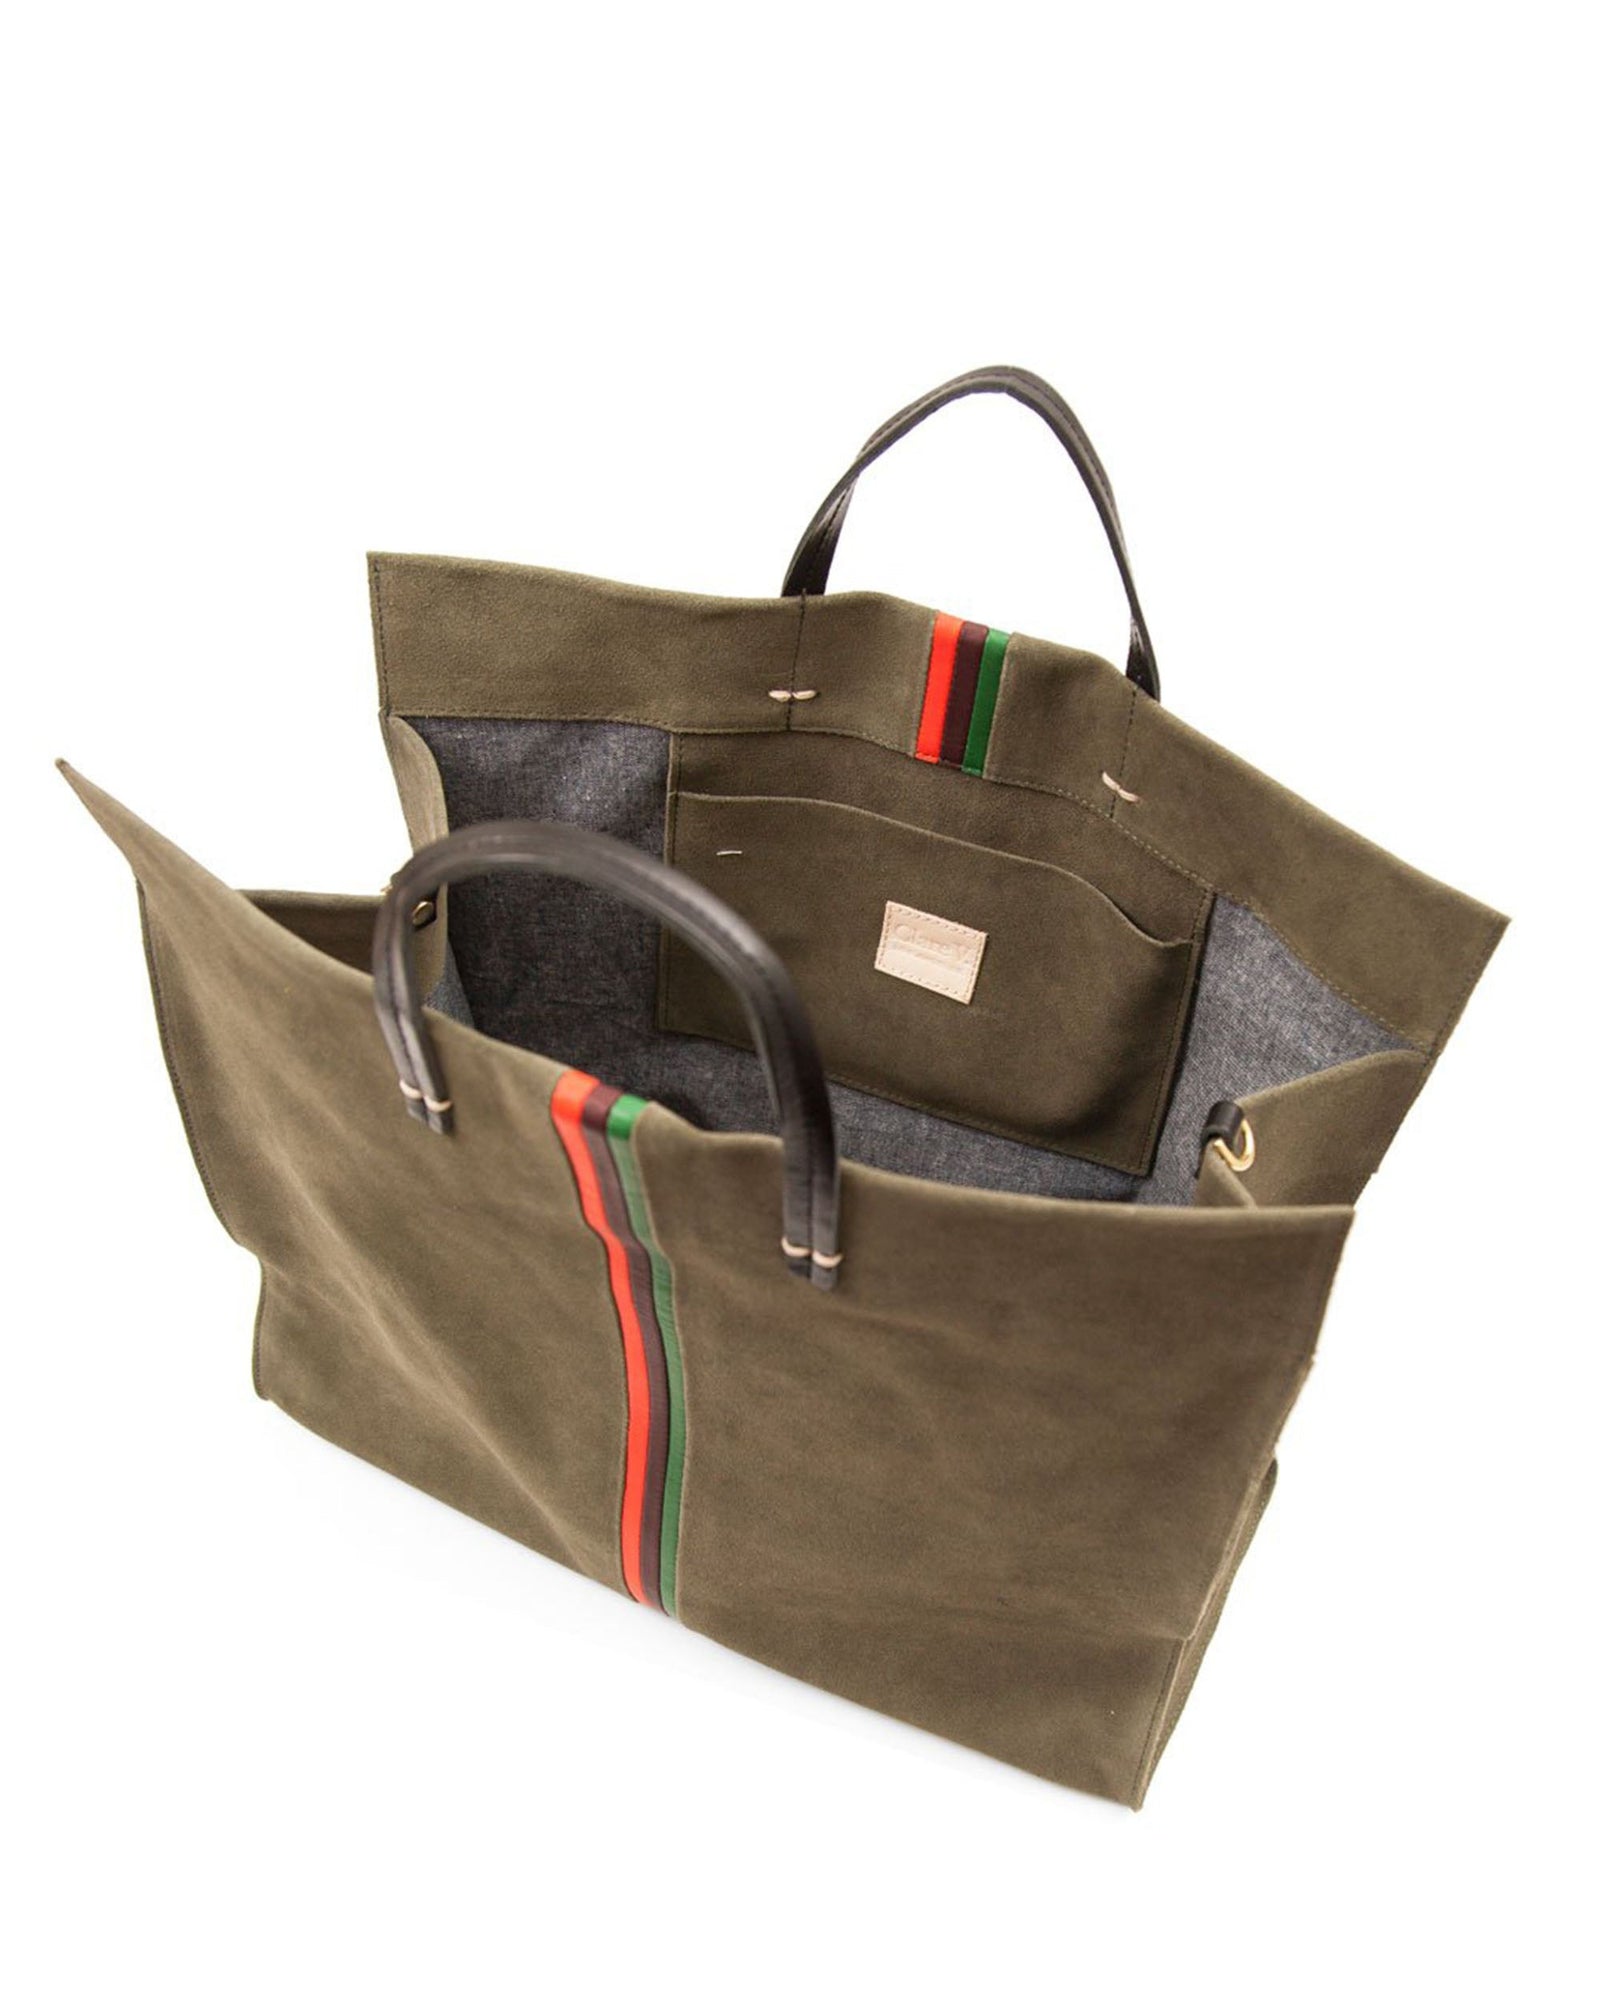 Army Suede with Lipsitck, Plum, and Fern Mini Stripes Simple Tote - Interior